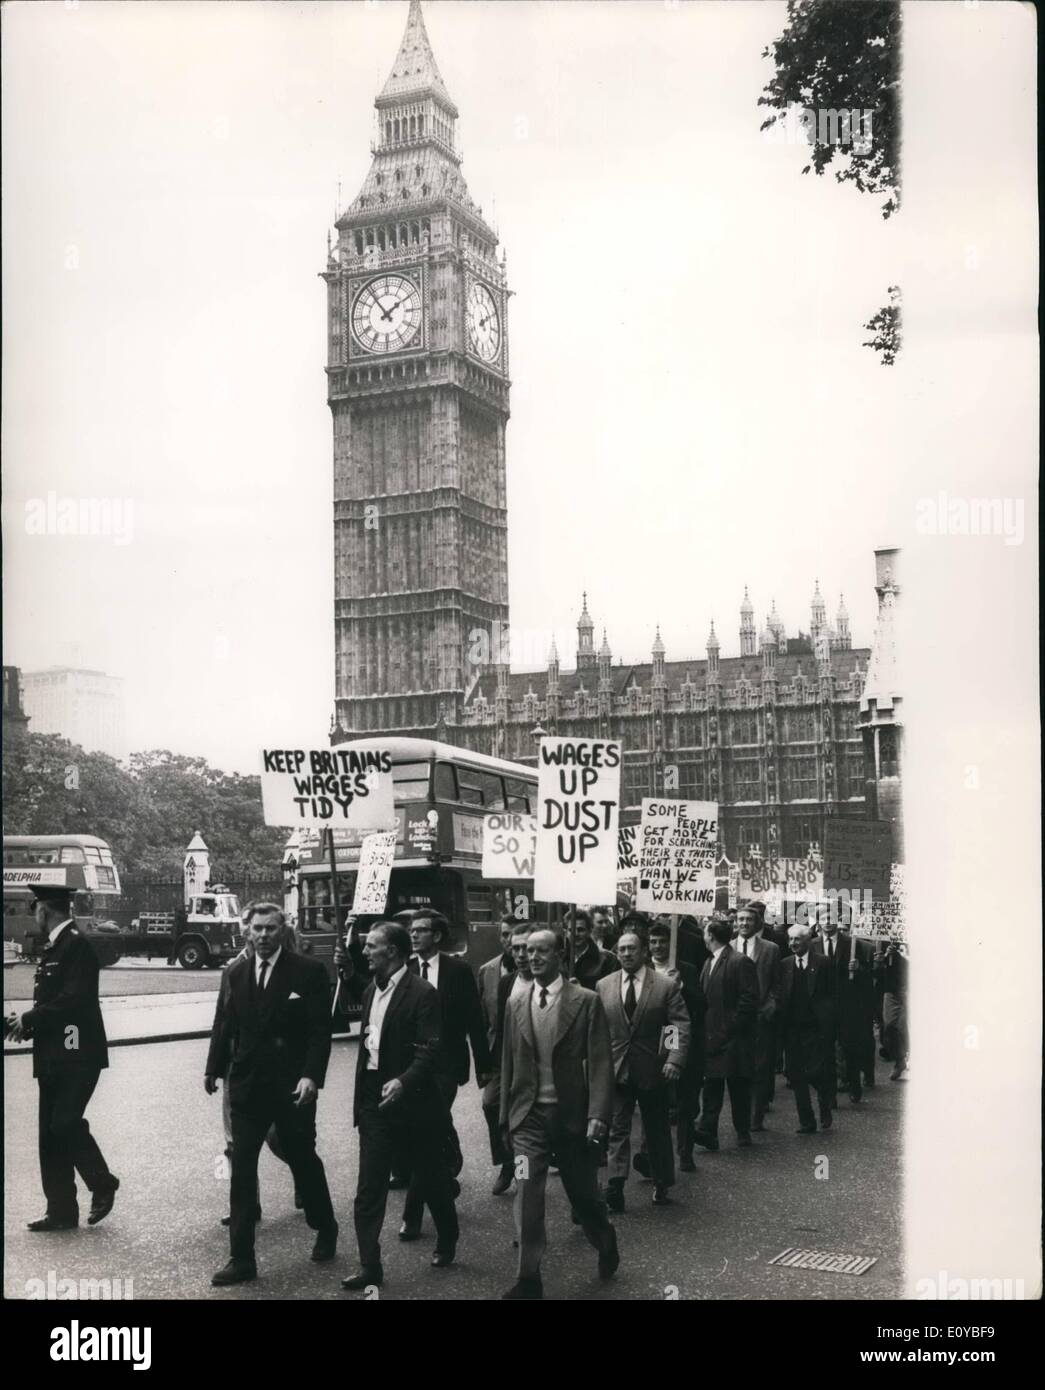 Oct. 10, 1969 - Striking Dustmen march to Caxton Hall: Striking London dustmen today marched to Caxton Hall today, where emergency talks between borough council employers and trads union leaders were taking place, in an attempt to and the dustmen strike. Photo shows Dustmen seen in Westminster today as they marched to Caxton Hall. Stock Photo